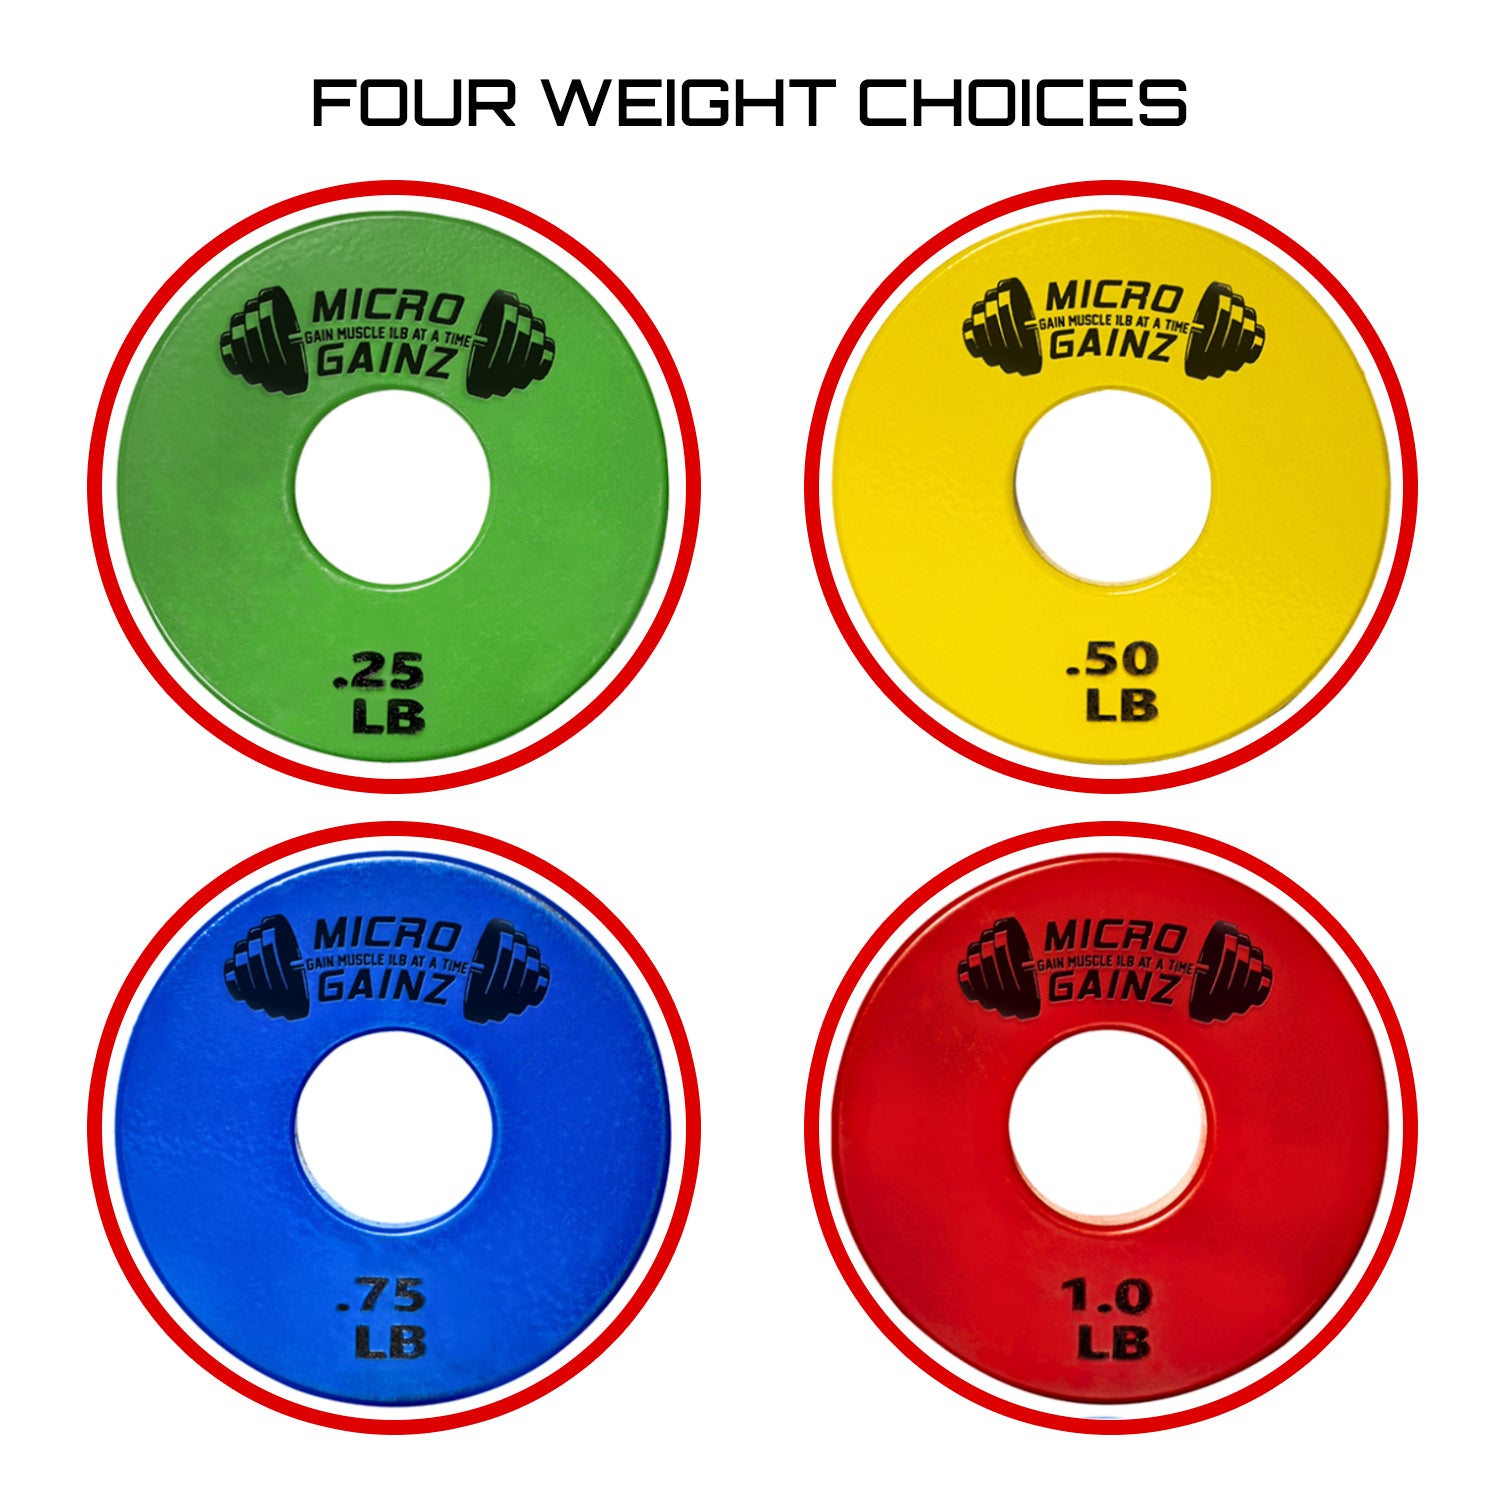 Micro Gainz Multi-Color Standard 1-Inch Center Hole Fractional Weight Plates Set of 8 Plates .25LB-1LB  w/ Bag